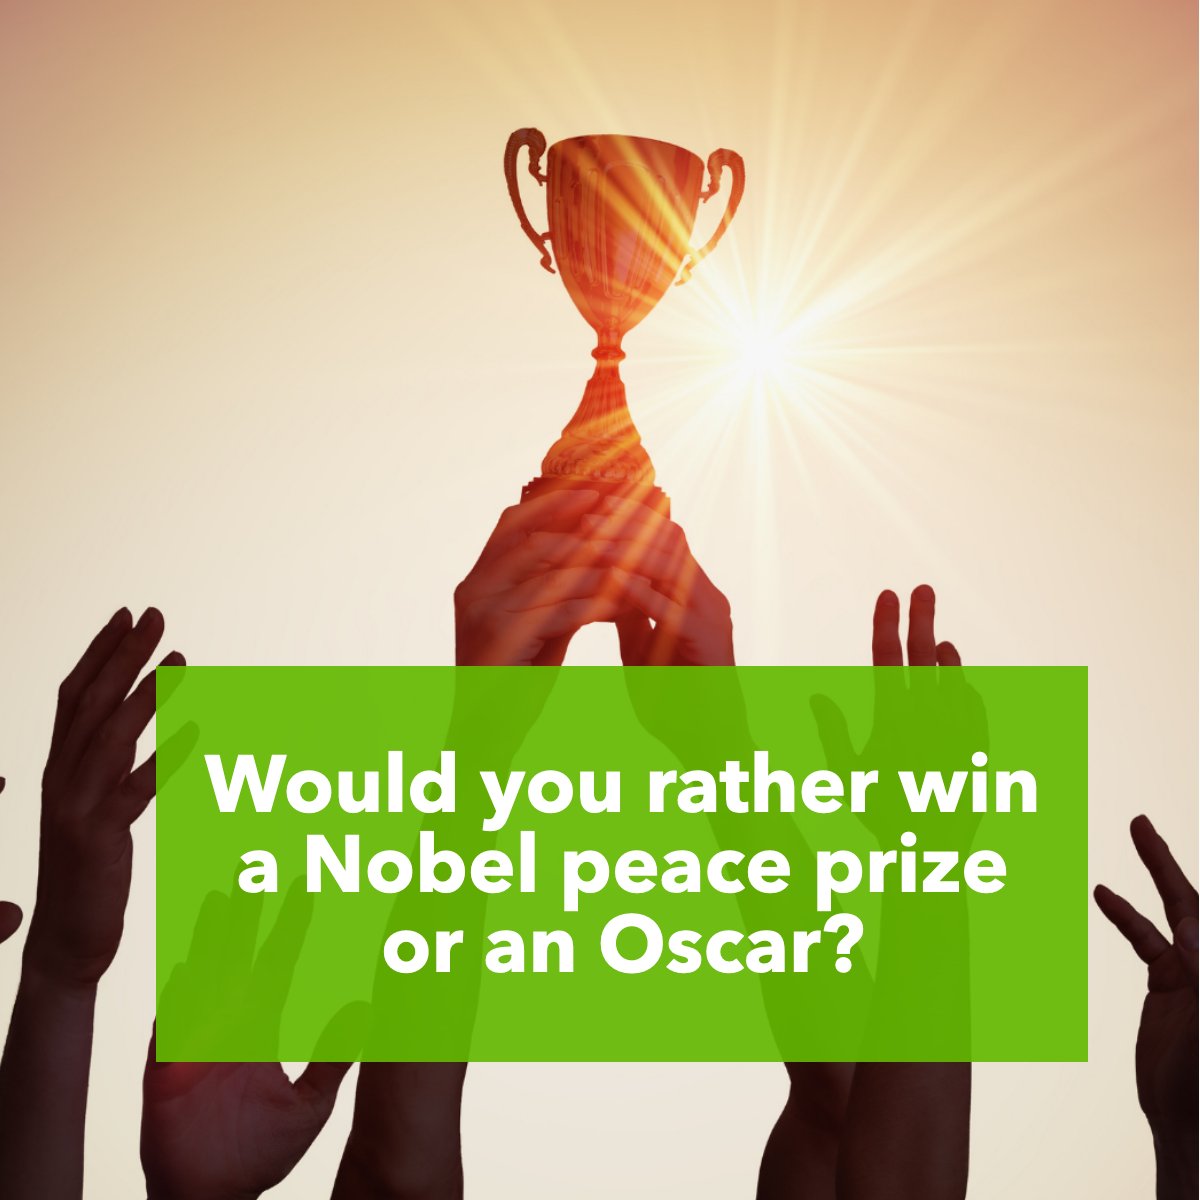 Would you rather win a Nobel peace prize or an Oscar? 🏆 🥇

What would you like? Tell us in the comments.

#theoscars    #nobelprize    #whatwouldyoulike    #thropy    #win    #winner
#YourPerfectHome #CRayBrower #SanJoaquinCounty #StocktonCA #RealEstate